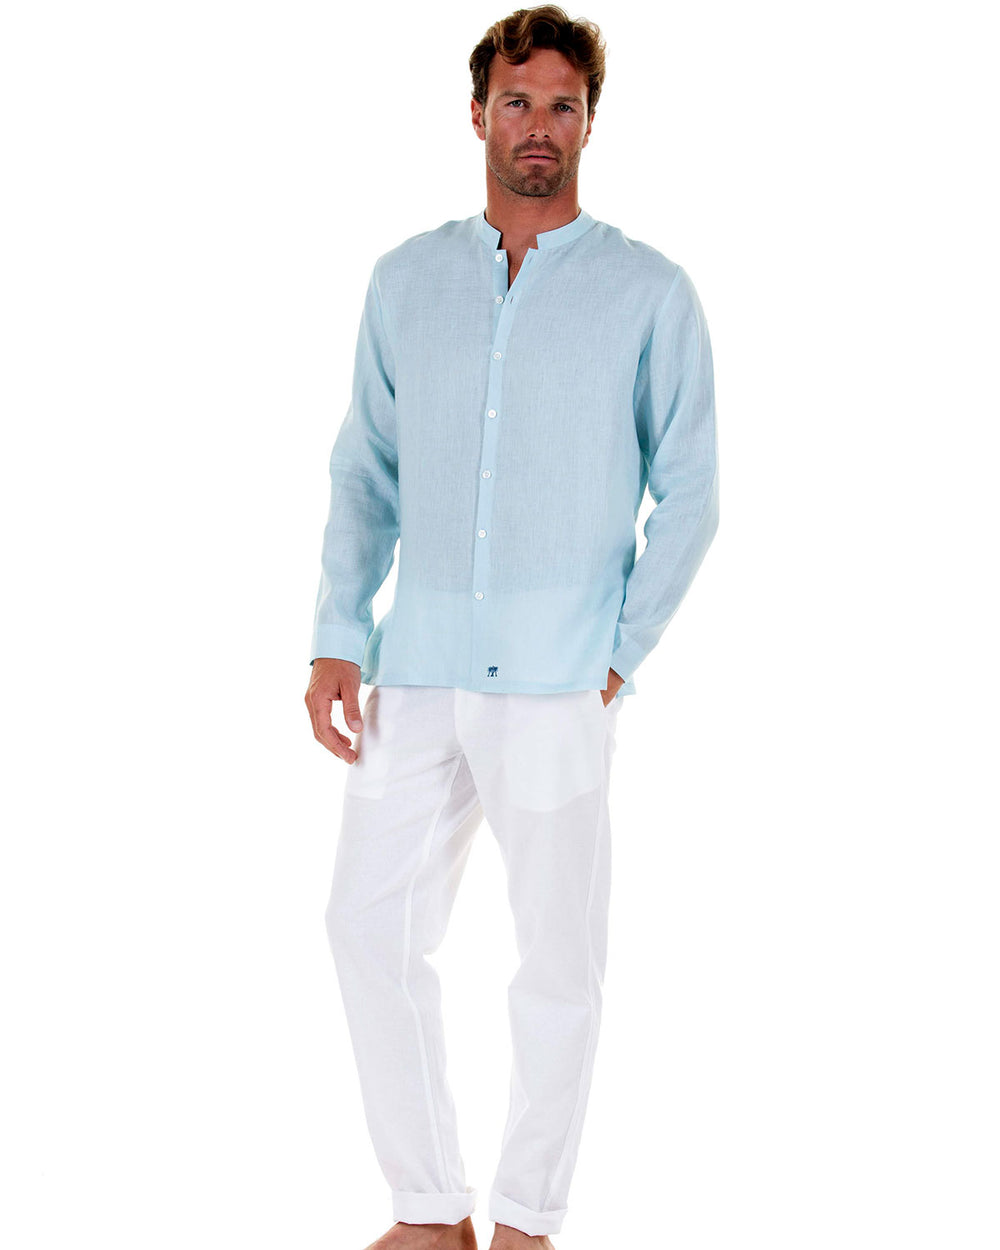 Mens Collarless Shirts - Pink House Mustique